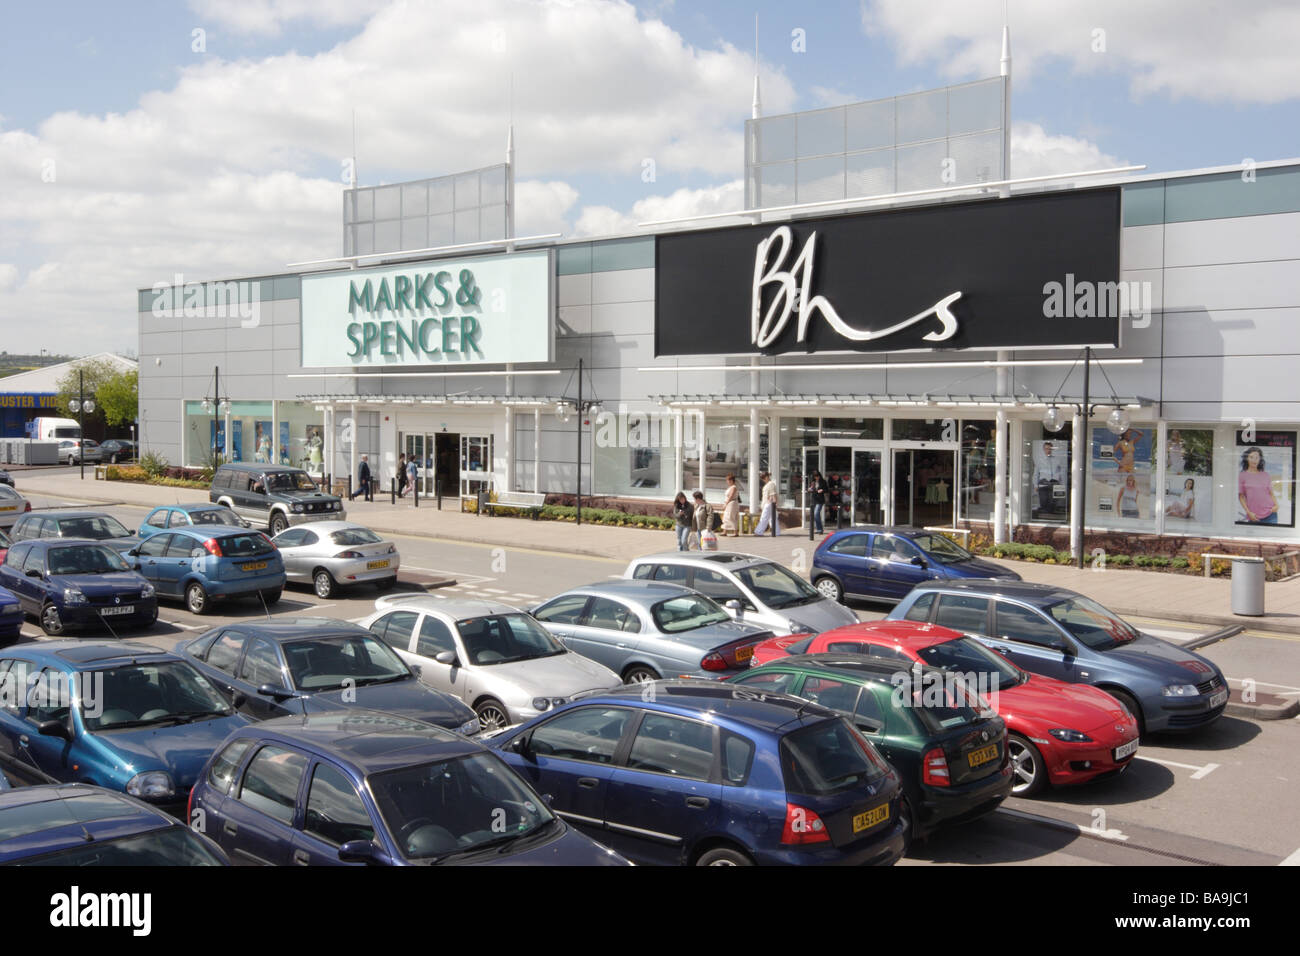 BHS and Marks & Spencer stores, Parkgate Shopping, Rotherham Stock Photo